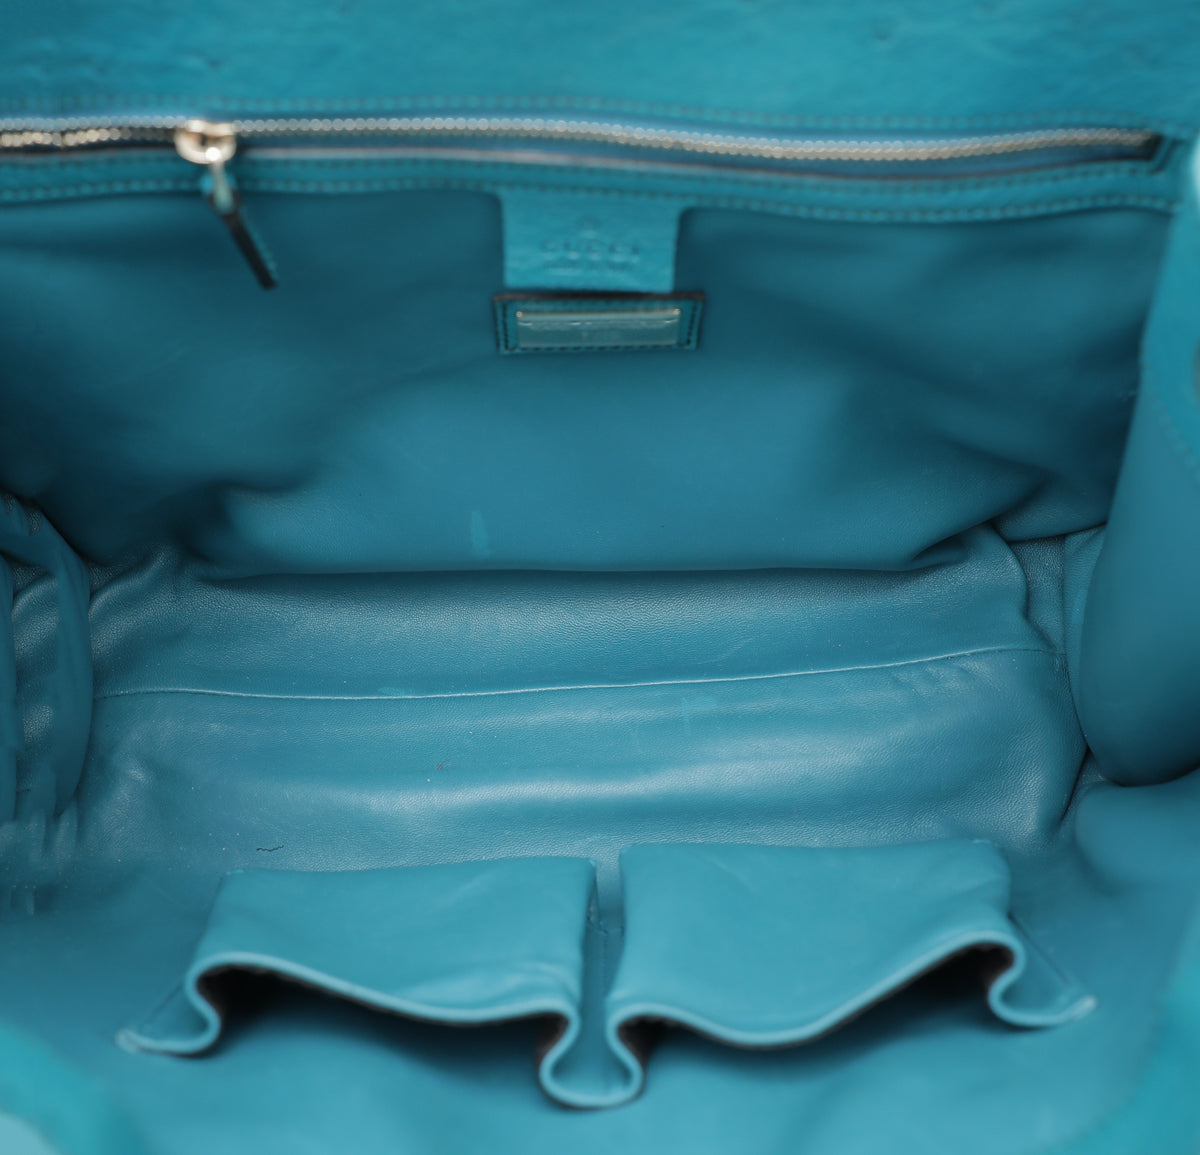 Gucci Turquoise Ostrich Emily GCC Exclusive 7-10 Bag